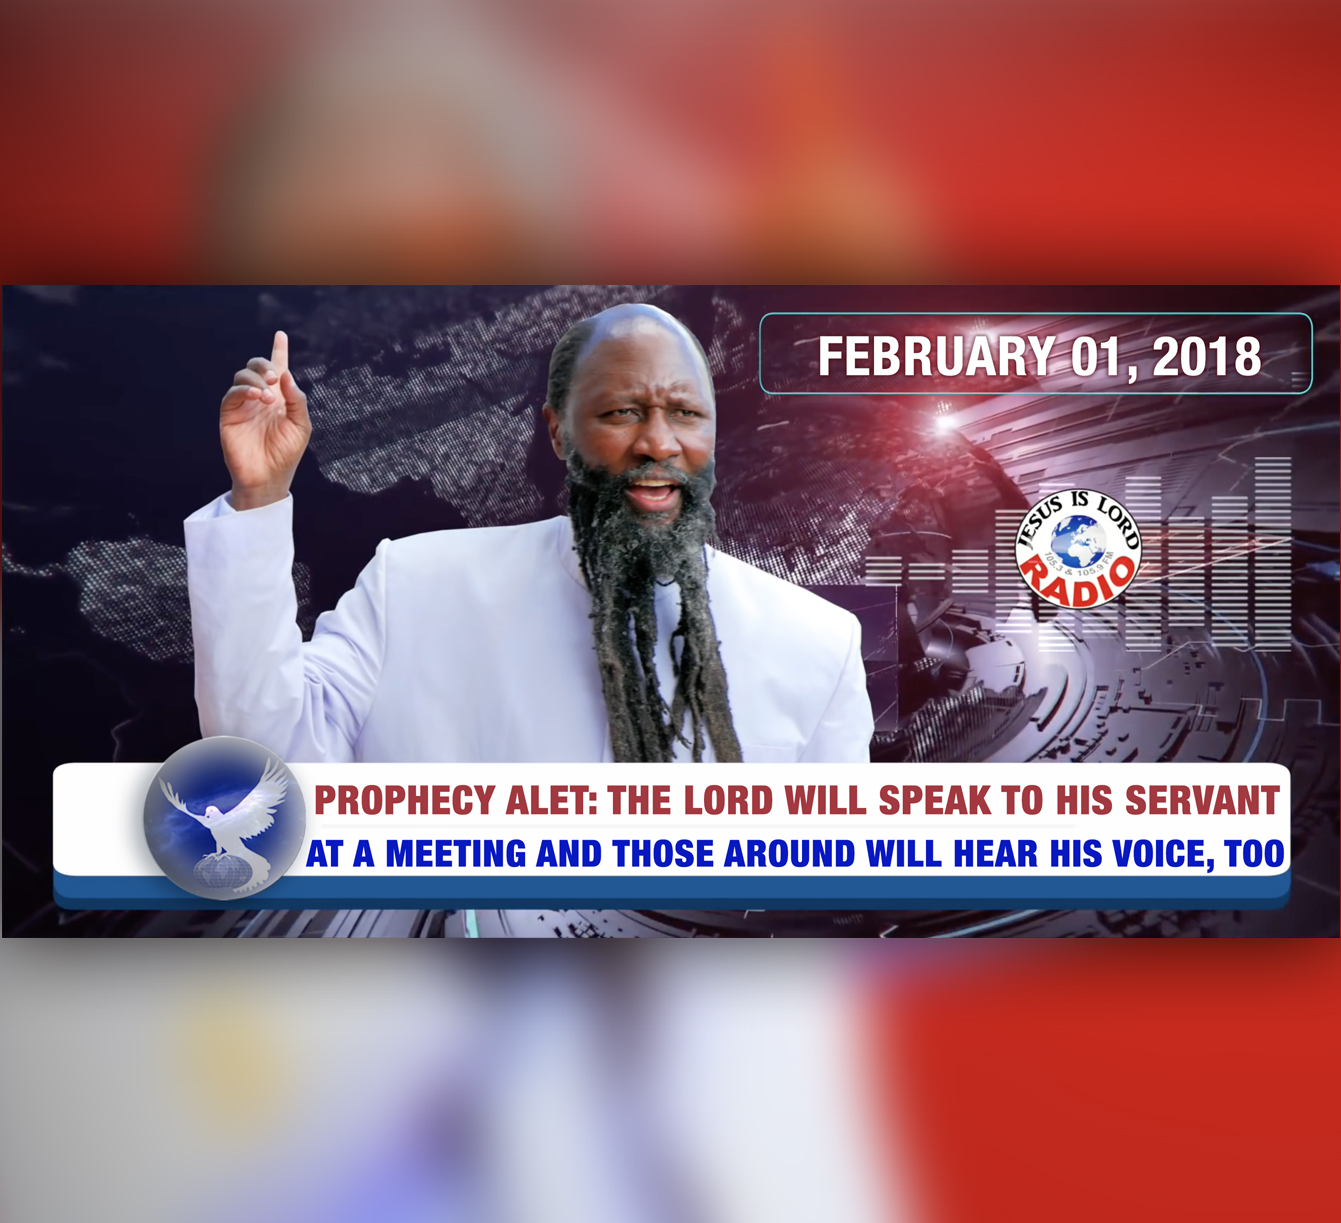 EPISODE 114 - PROPHECY: THE LORD WILL SPEAK AUDIBLY TO HIS SERVANT AT A MEETING, AND THOSE AROUND WILL HEAR HIS VOICE, TOO PART 1 (01FEB2018) - PROPHET DR. OWUOR